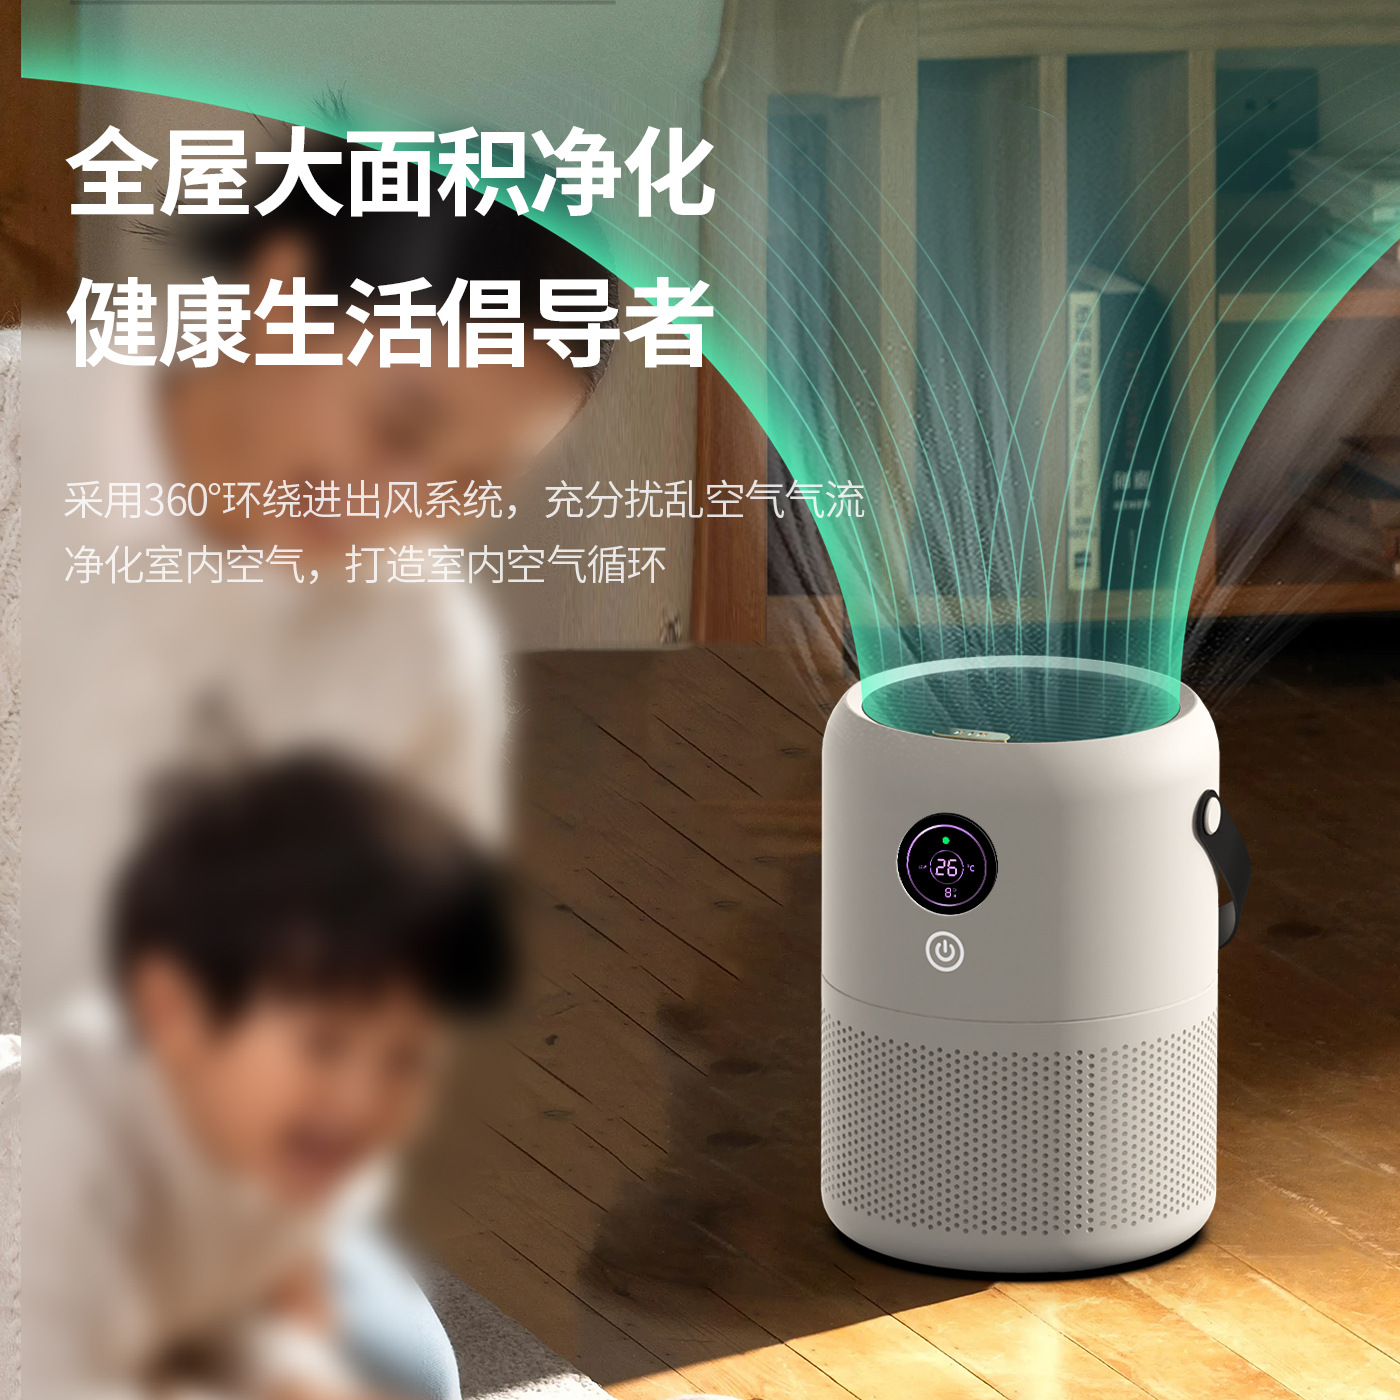 New Smart Air Purifiers Purification and Smoke Removal Indoor Home Negative Ion UV Purifier Factory